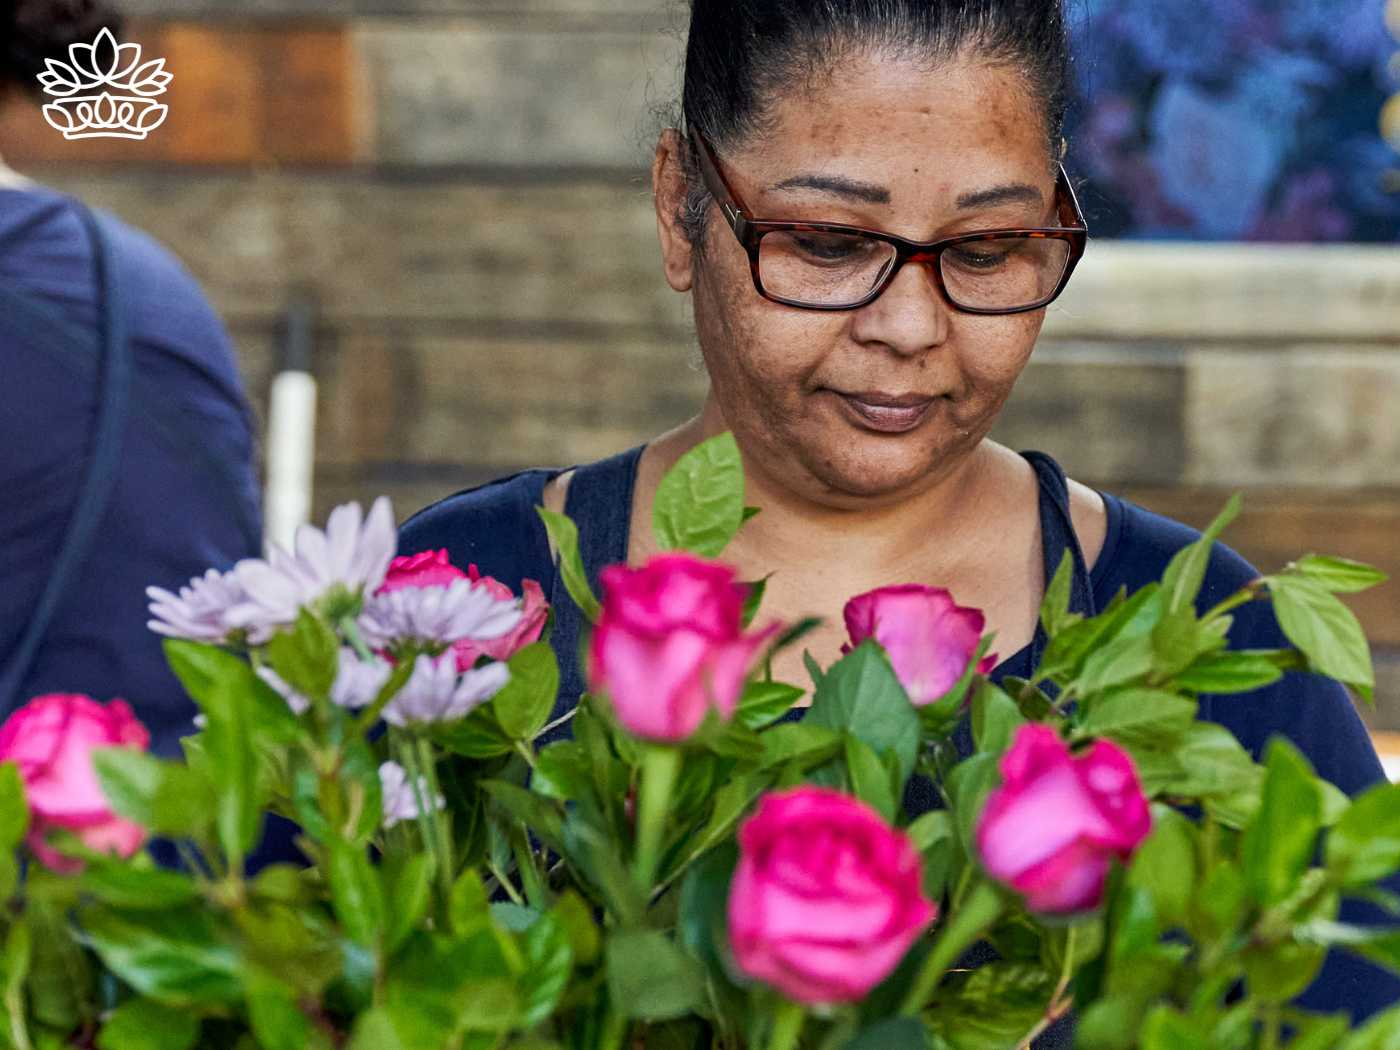 Focused florist arranging a vibrant collection of pink roses and daisies, showcasing the creativity and dedication available at the Fabulous Flowers and Gifts store, inviting customers to browse and shop their hampers.